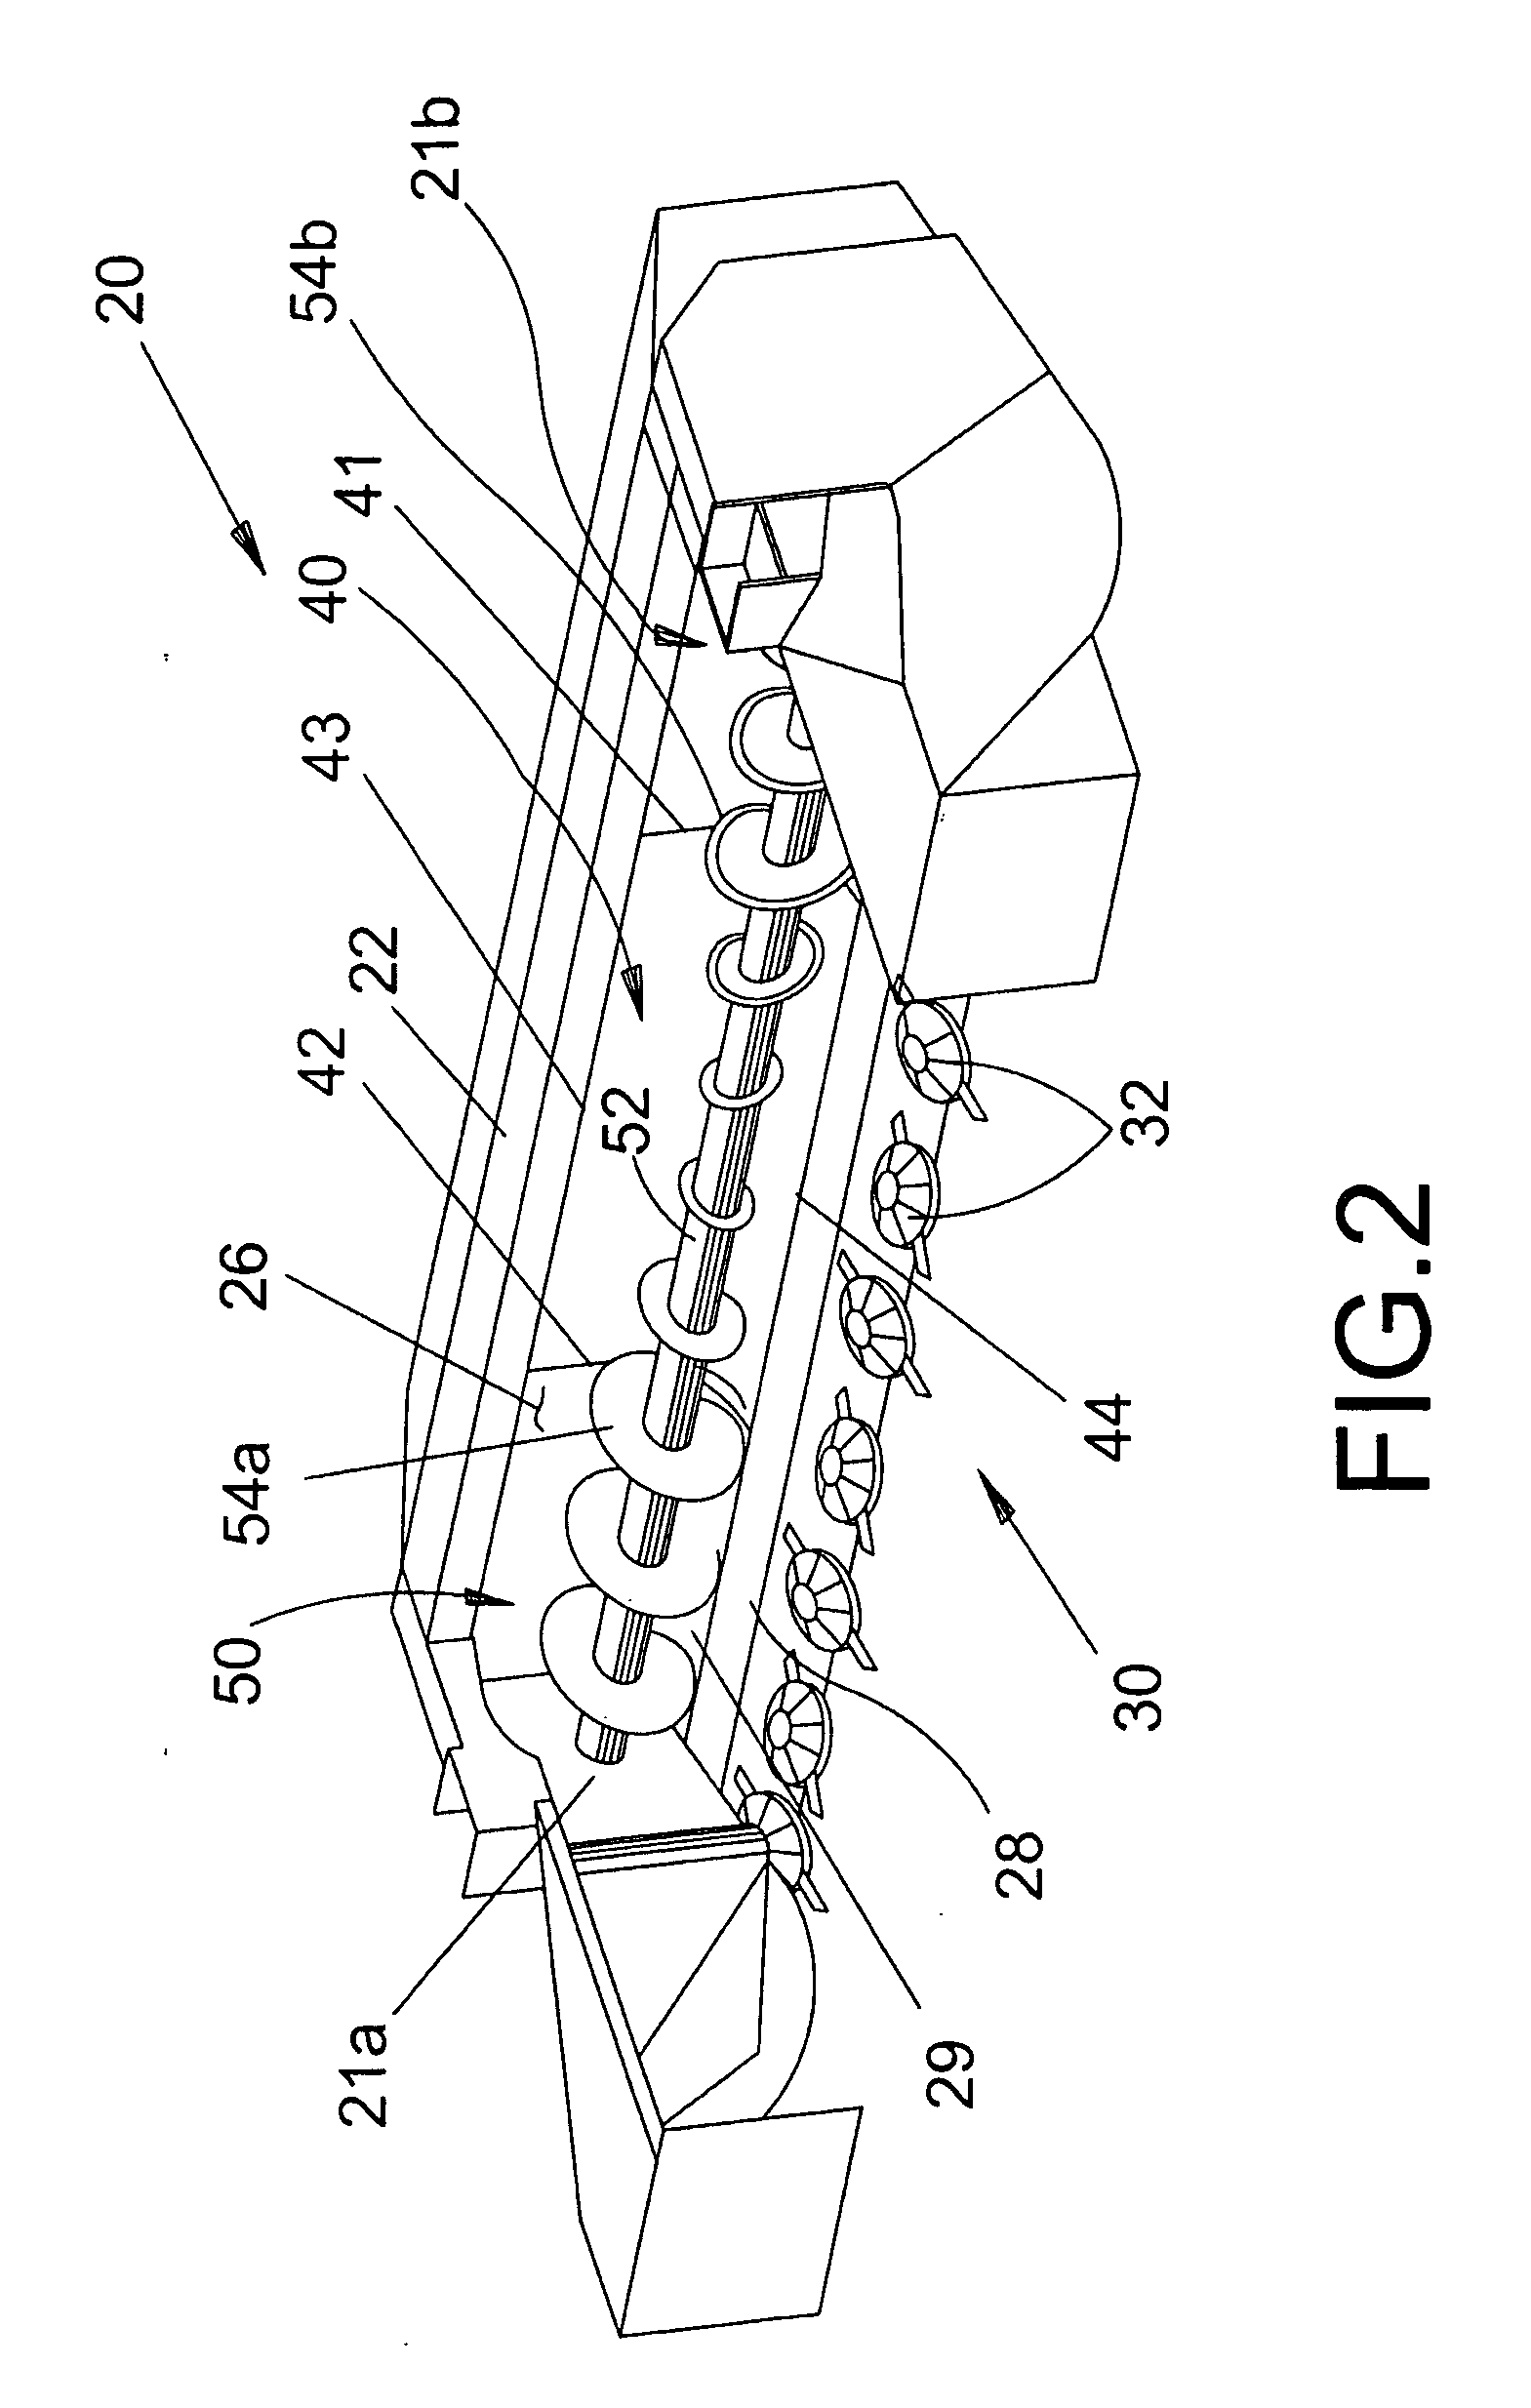 Auger with tapered flighting